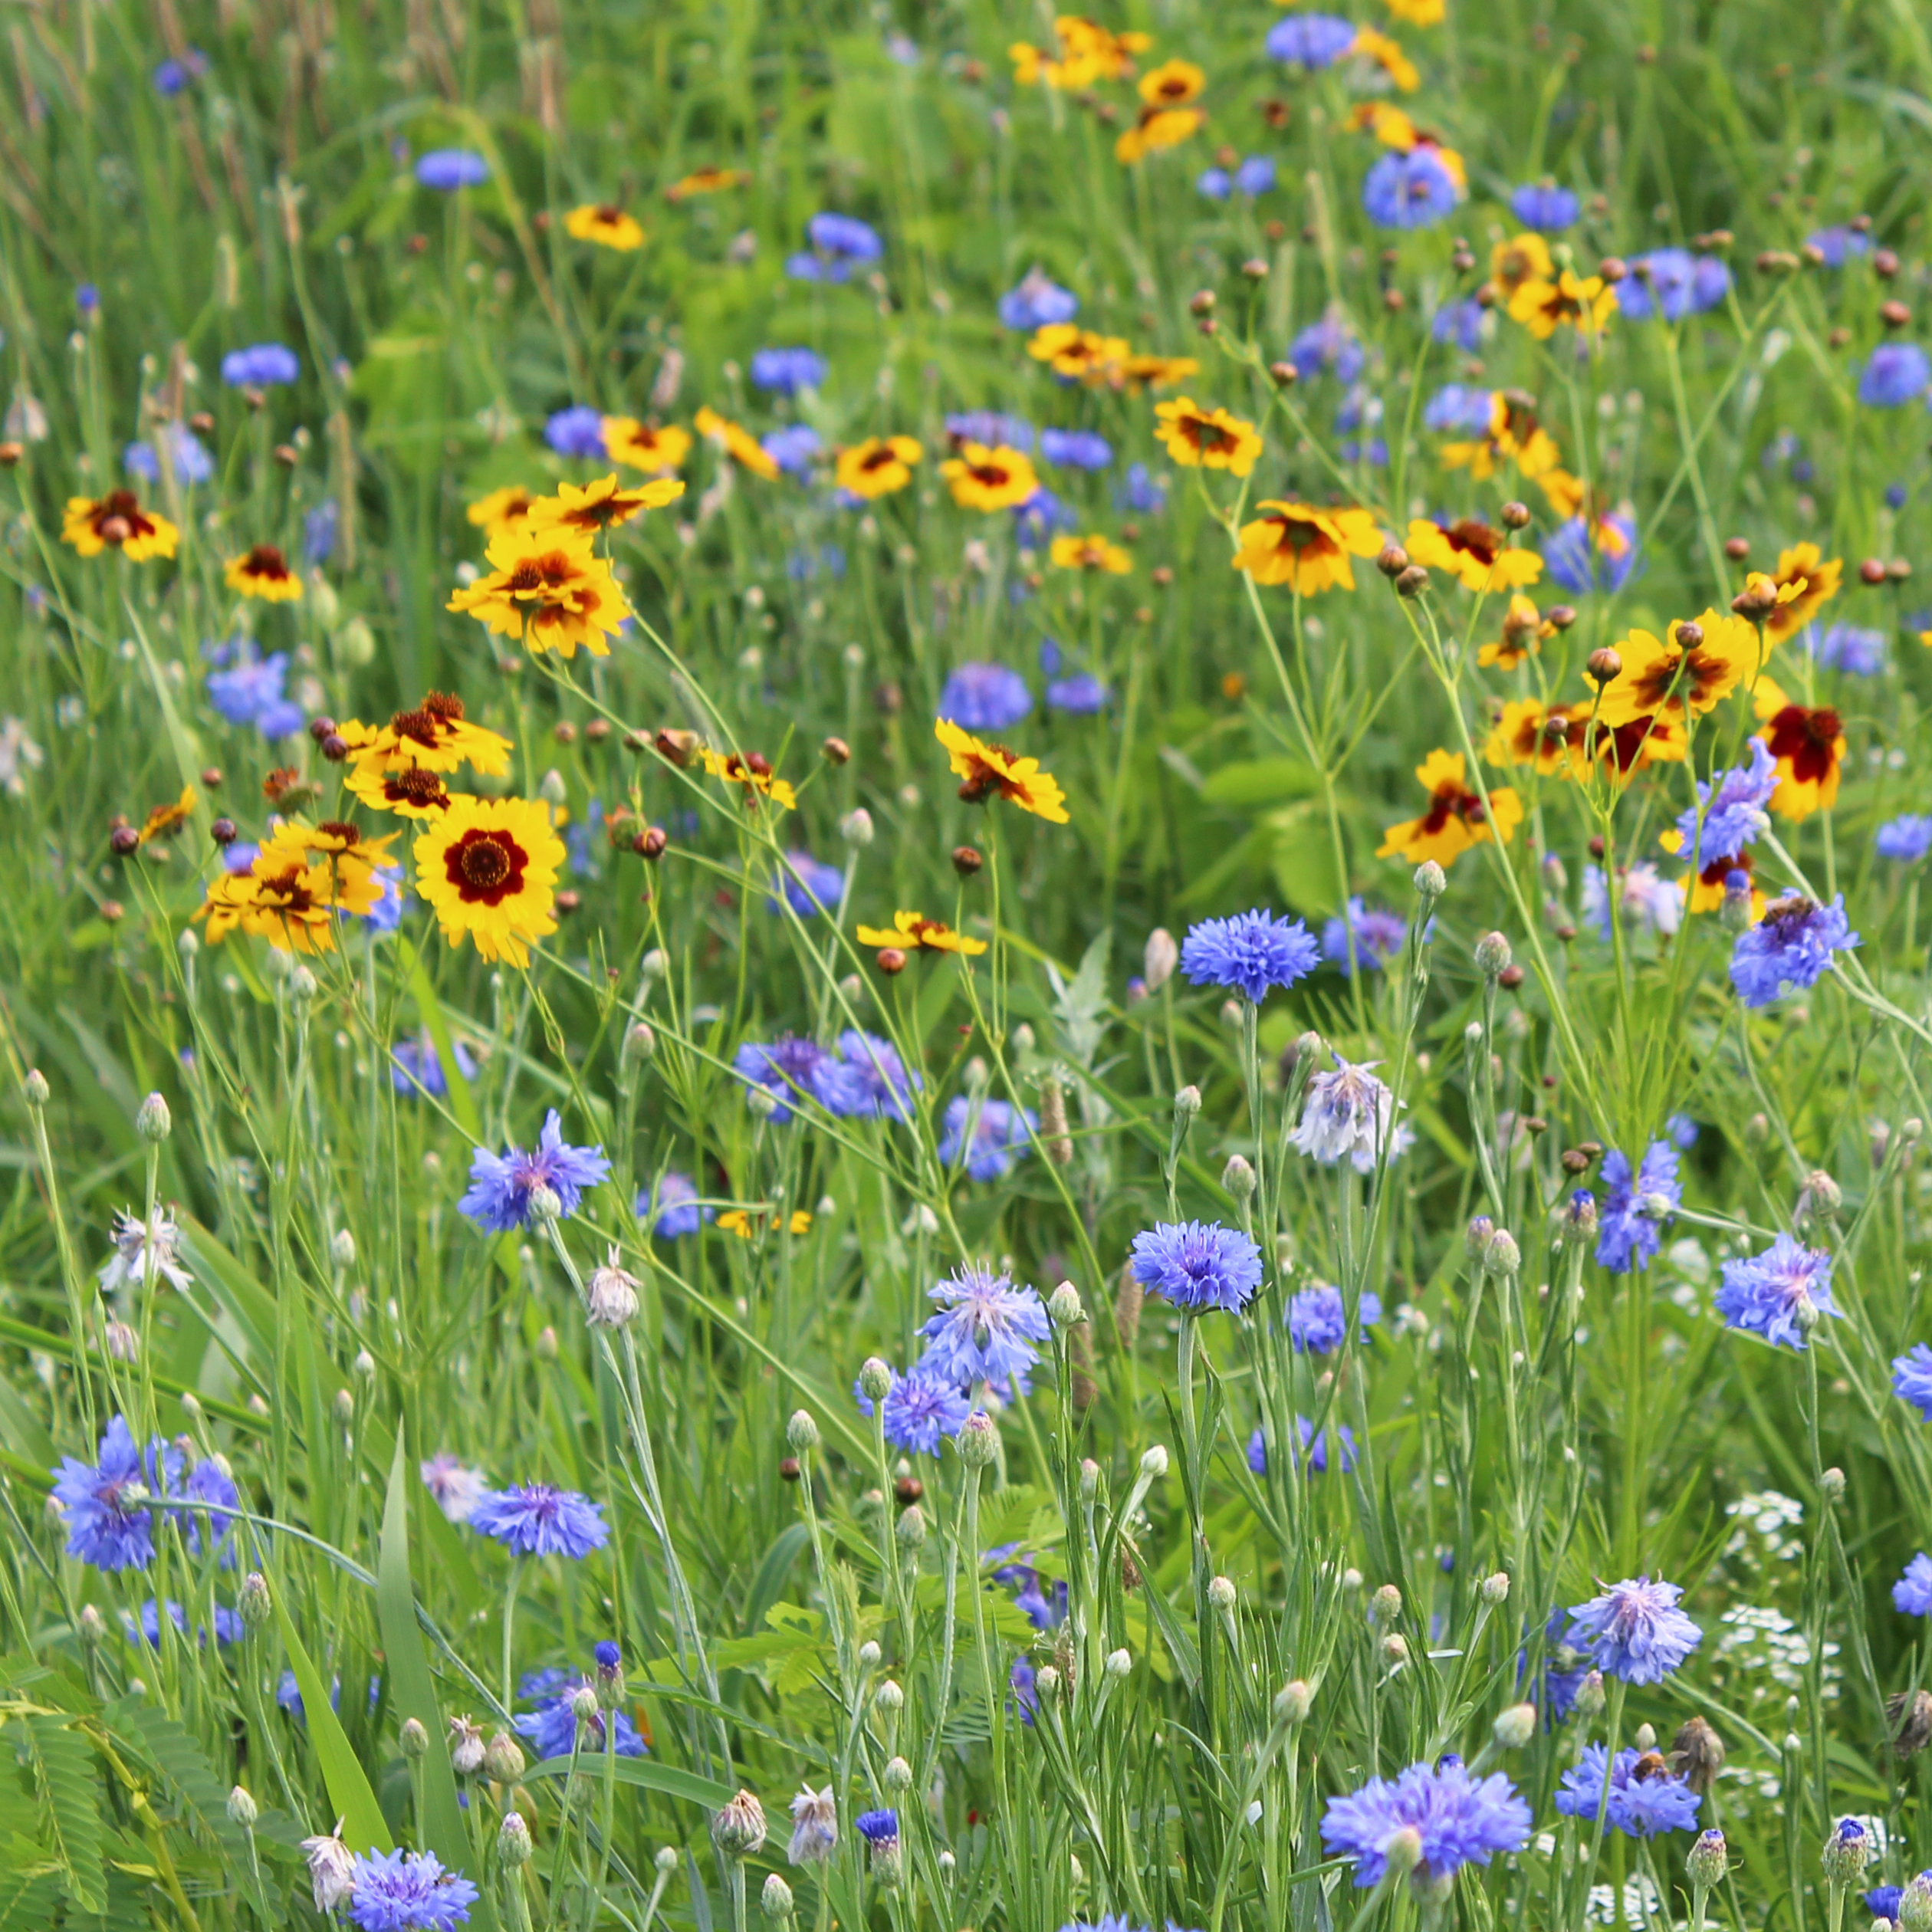 A meadow is filled with colorful blossoms, primarily bluish-purple and yellow flowers.